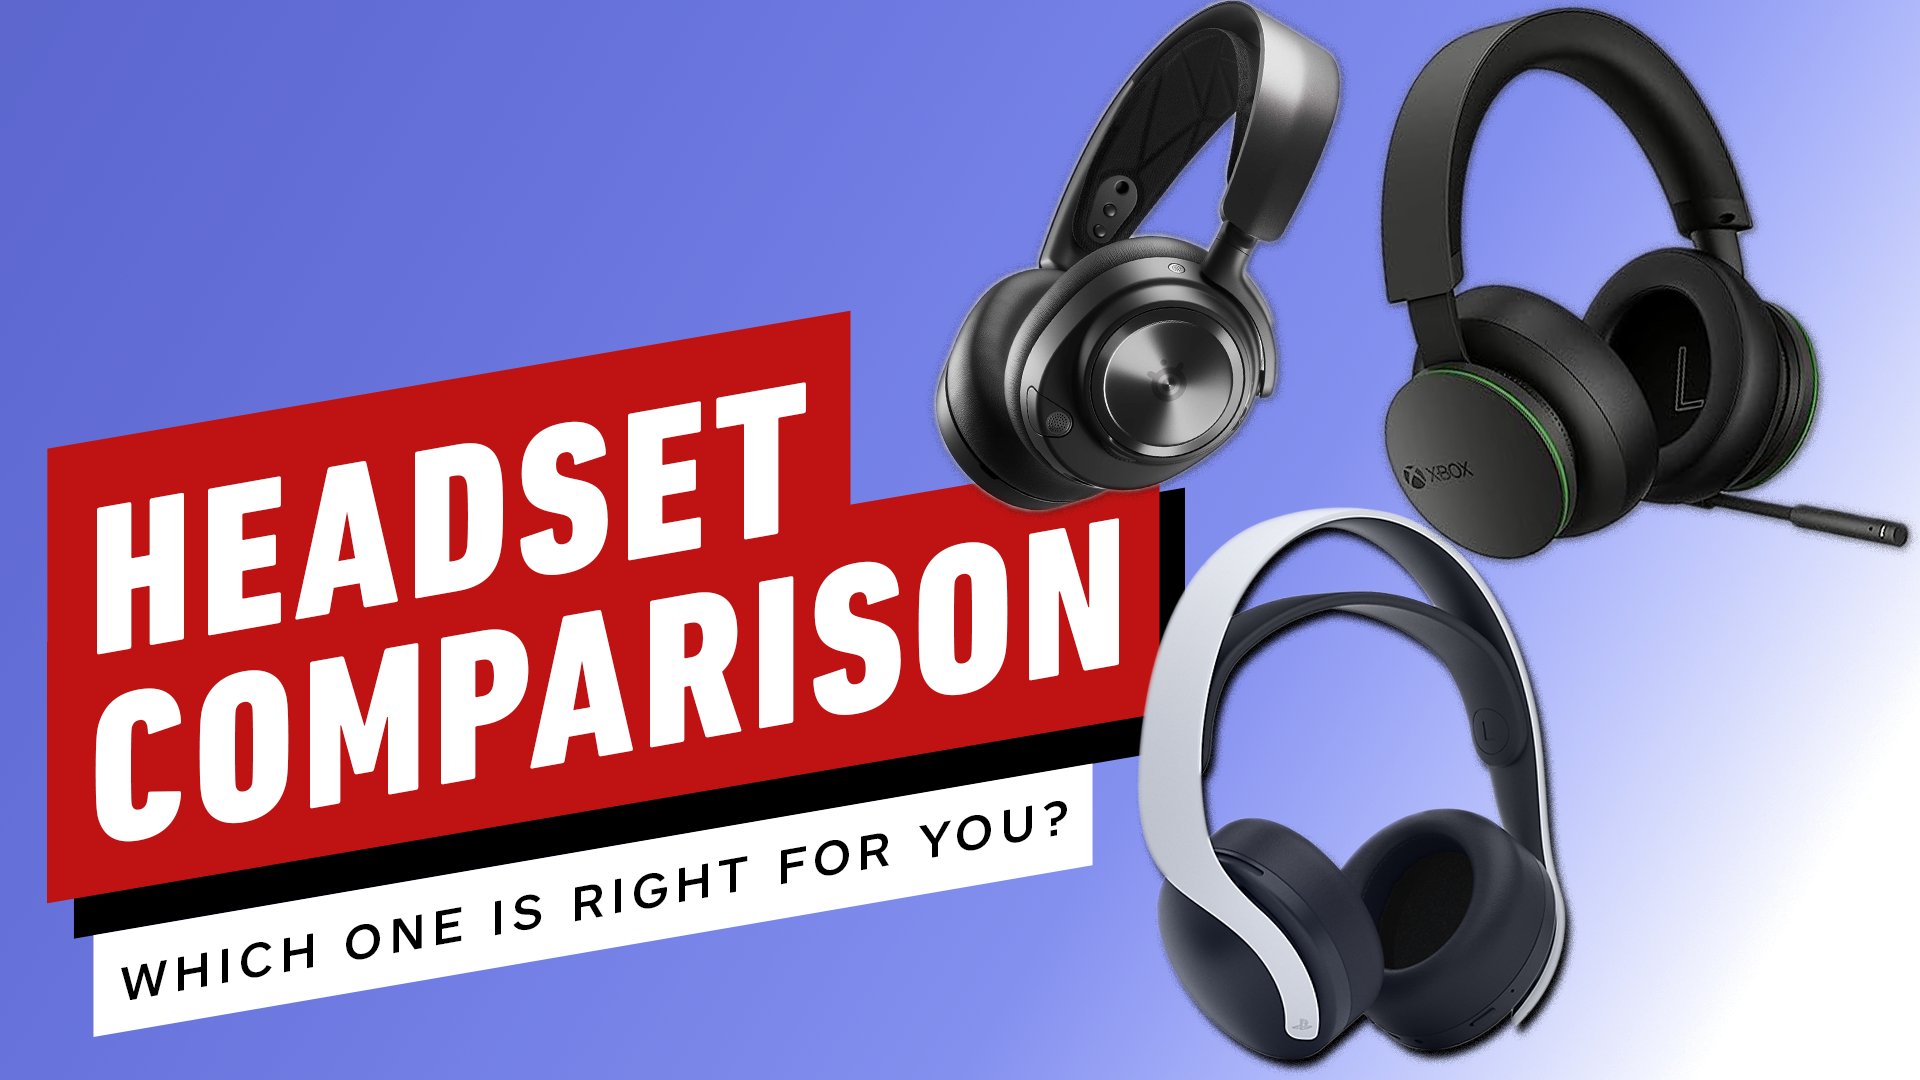 munt Voldoen Zwembad IGN on Twitter: "From fit to compatibility and cost, a lot goes into  choosing the right gaming headset, but we've got you covered with a guide  to the latest and greatest in